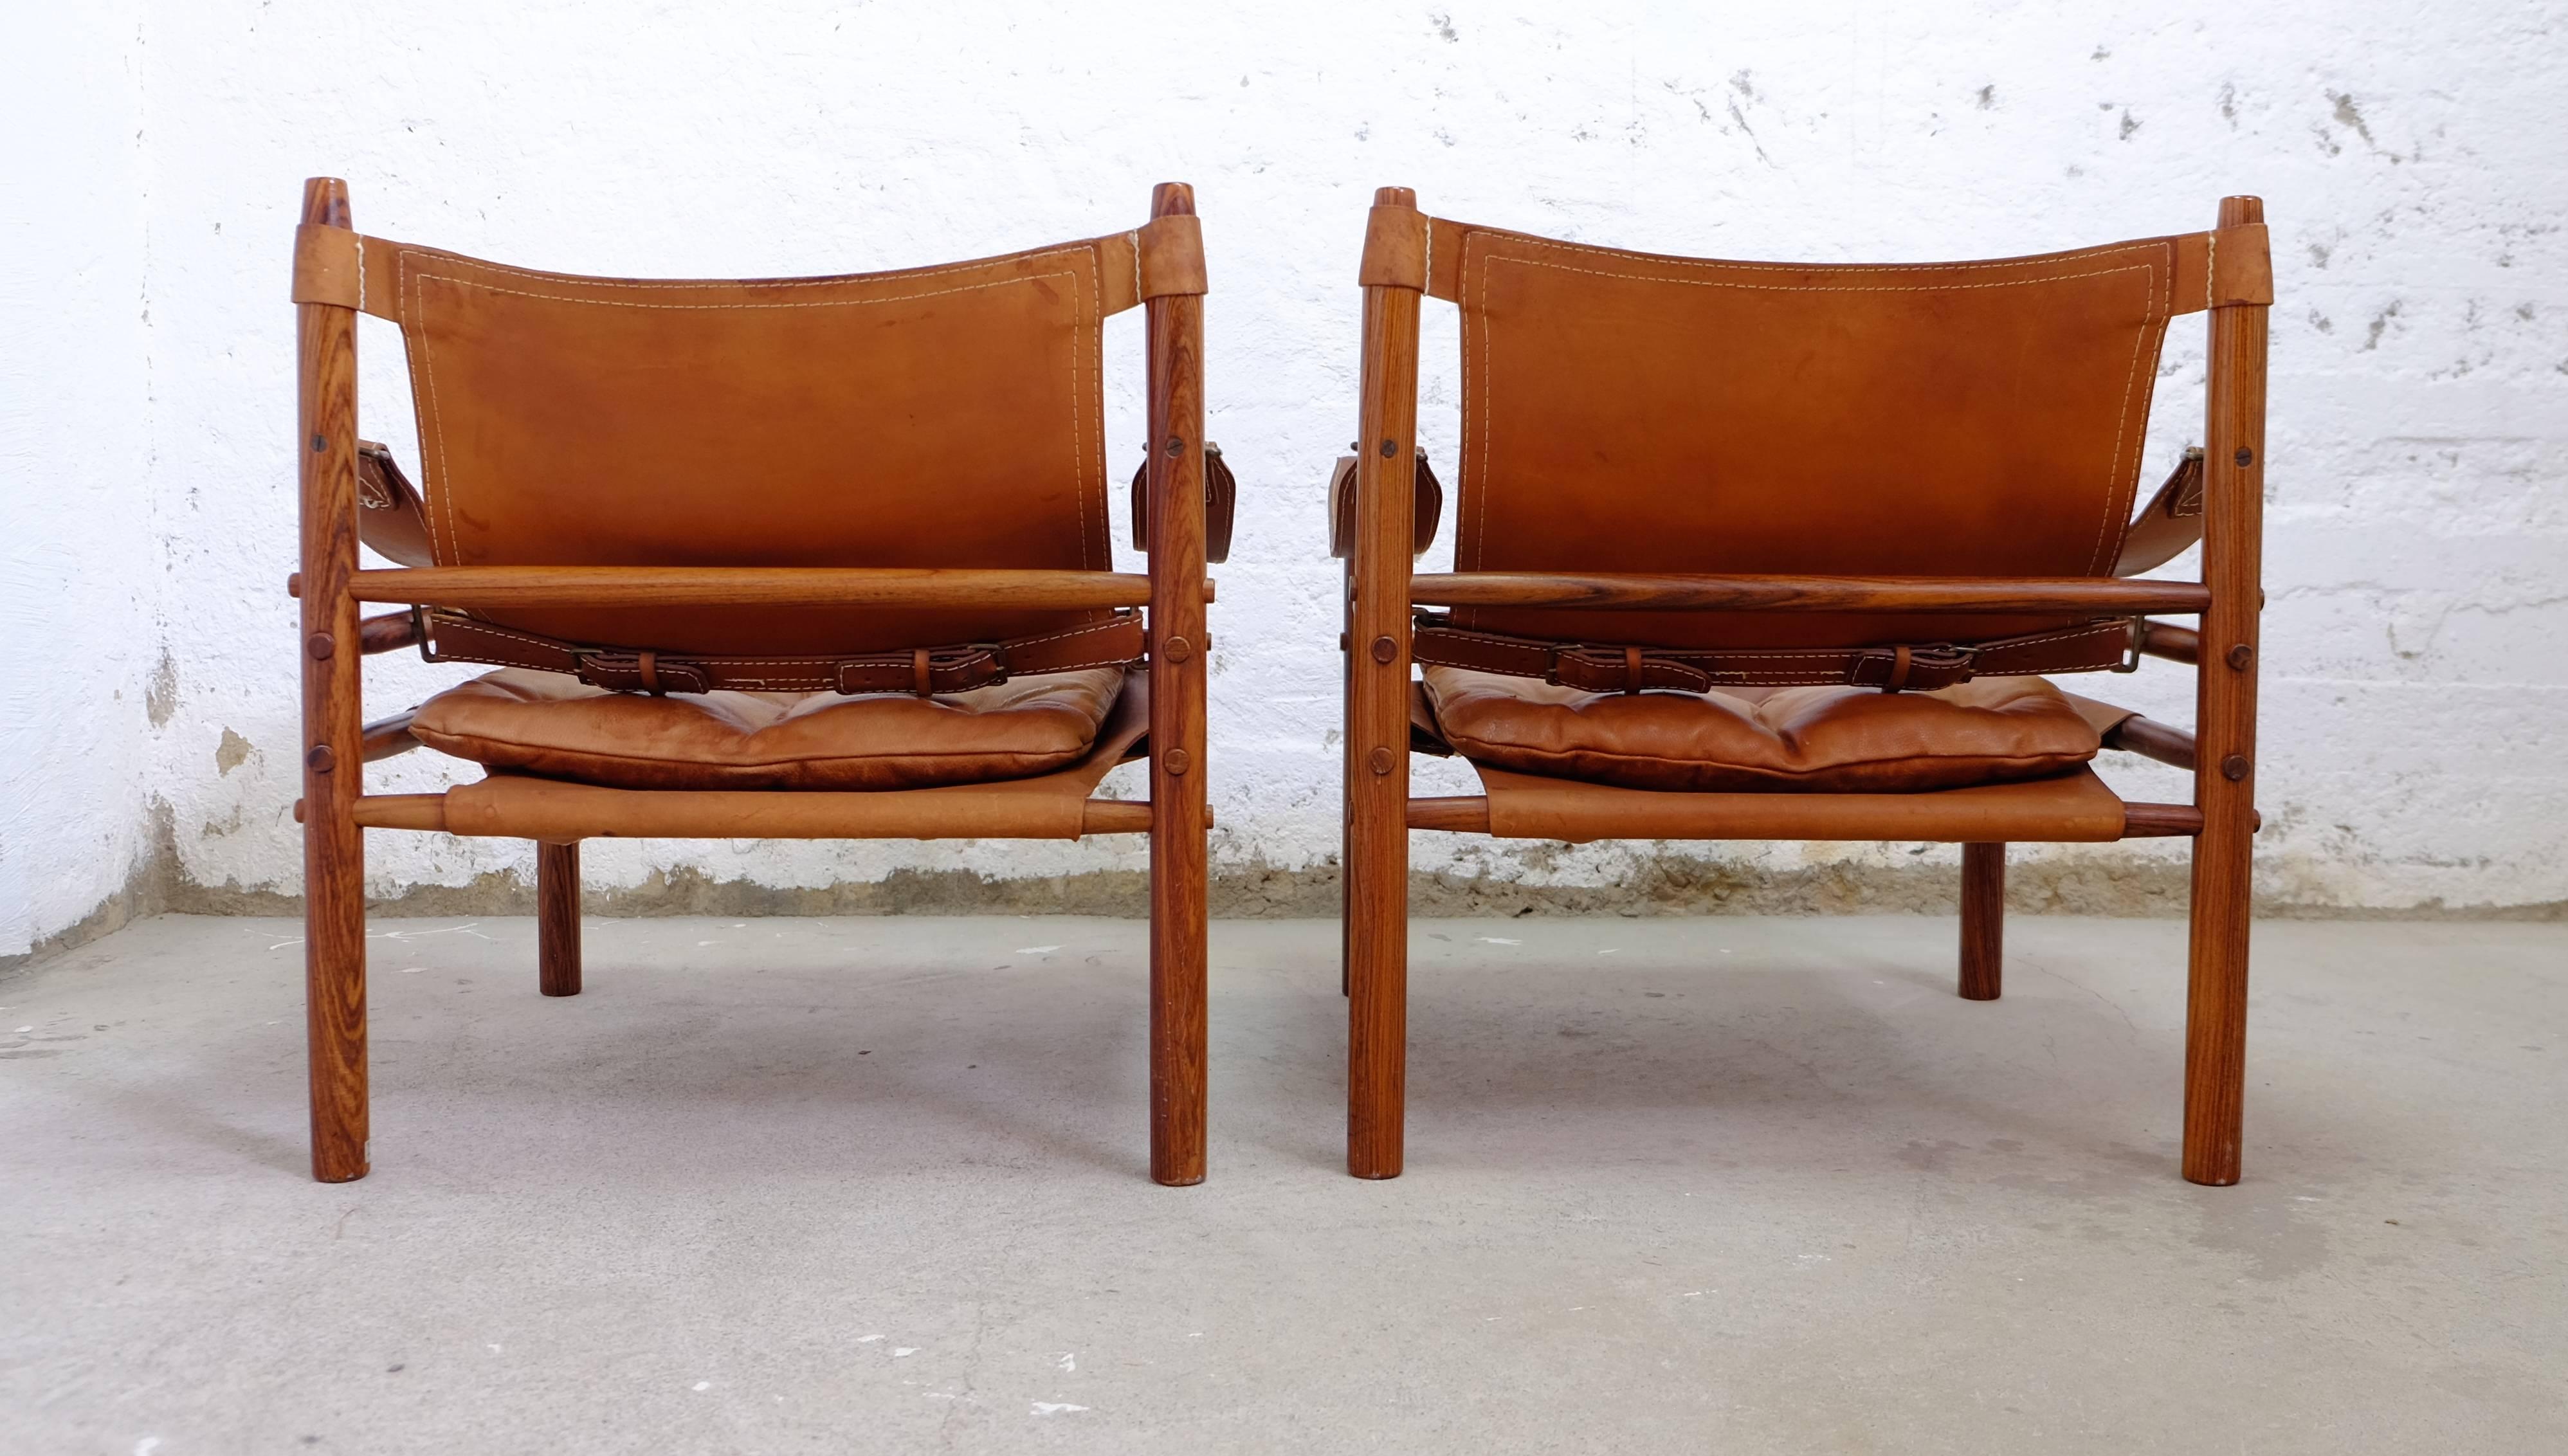 Great pair of easy chairs model name Sirocco. Designed by Arne Norell, produced by Arne Norell AB in Aneby, Sweden.